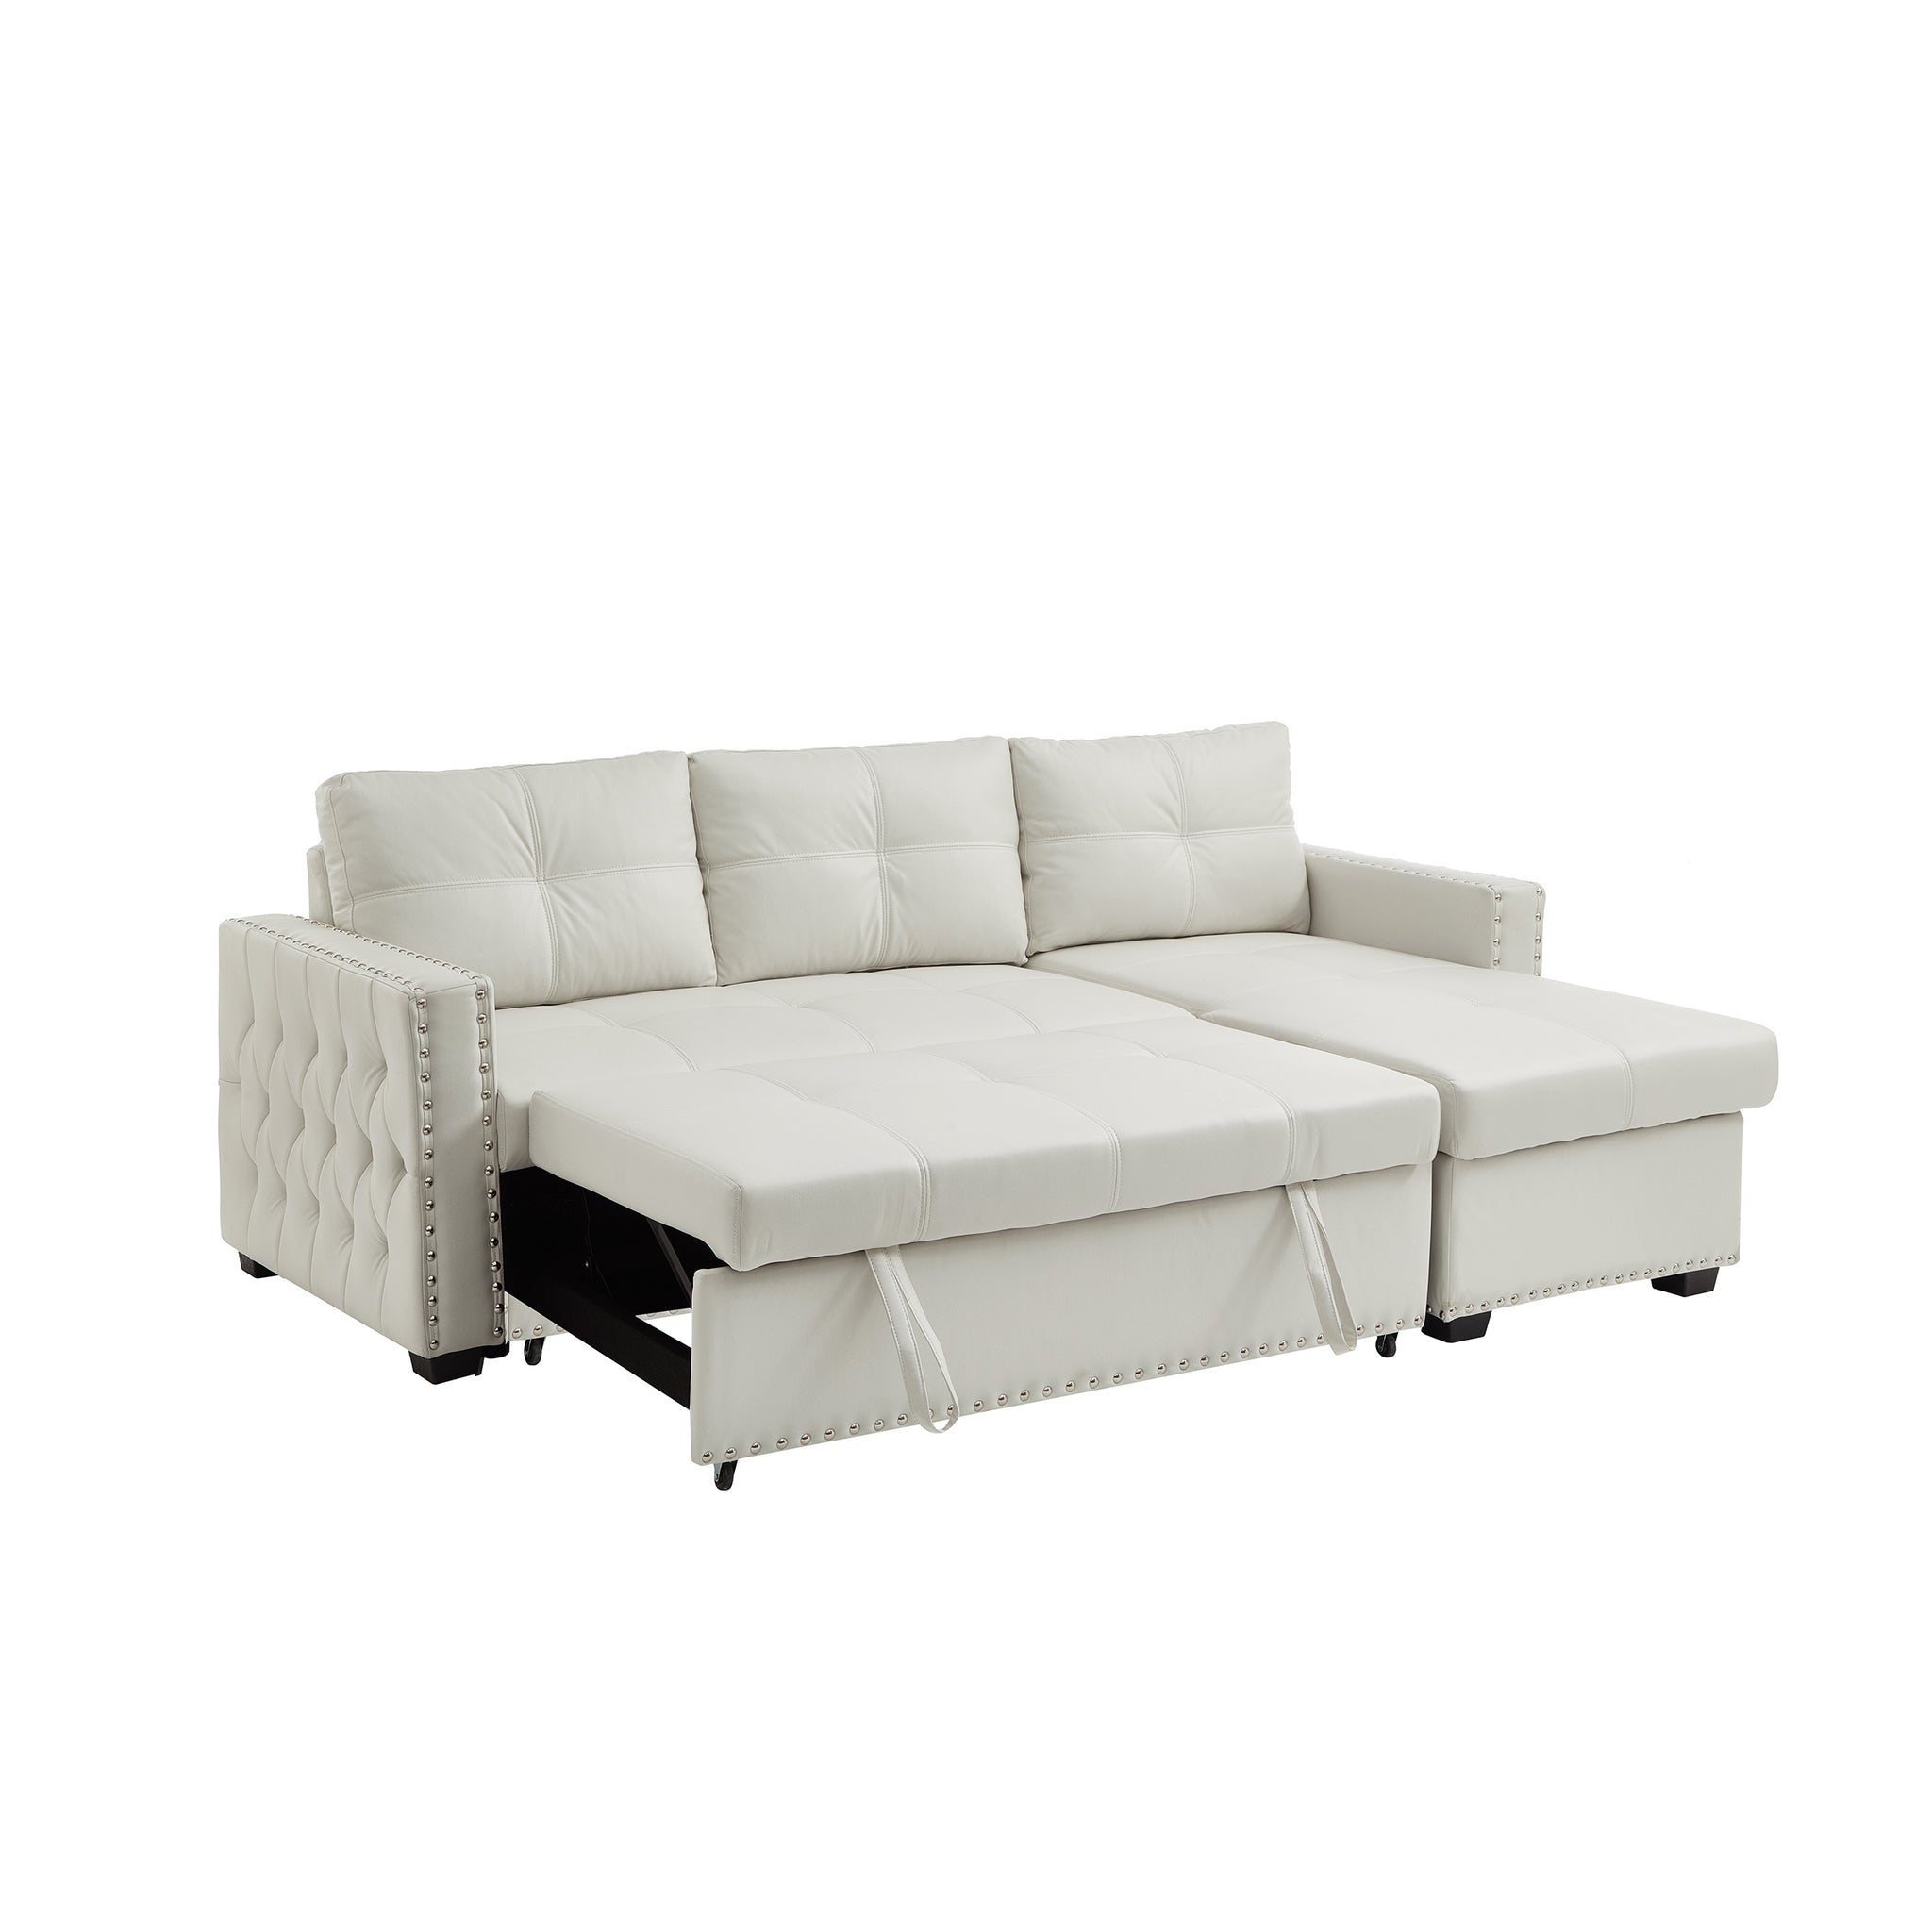 88" Convertible Pull Out Sofa Bed with Storage Chaise beige-microfiber